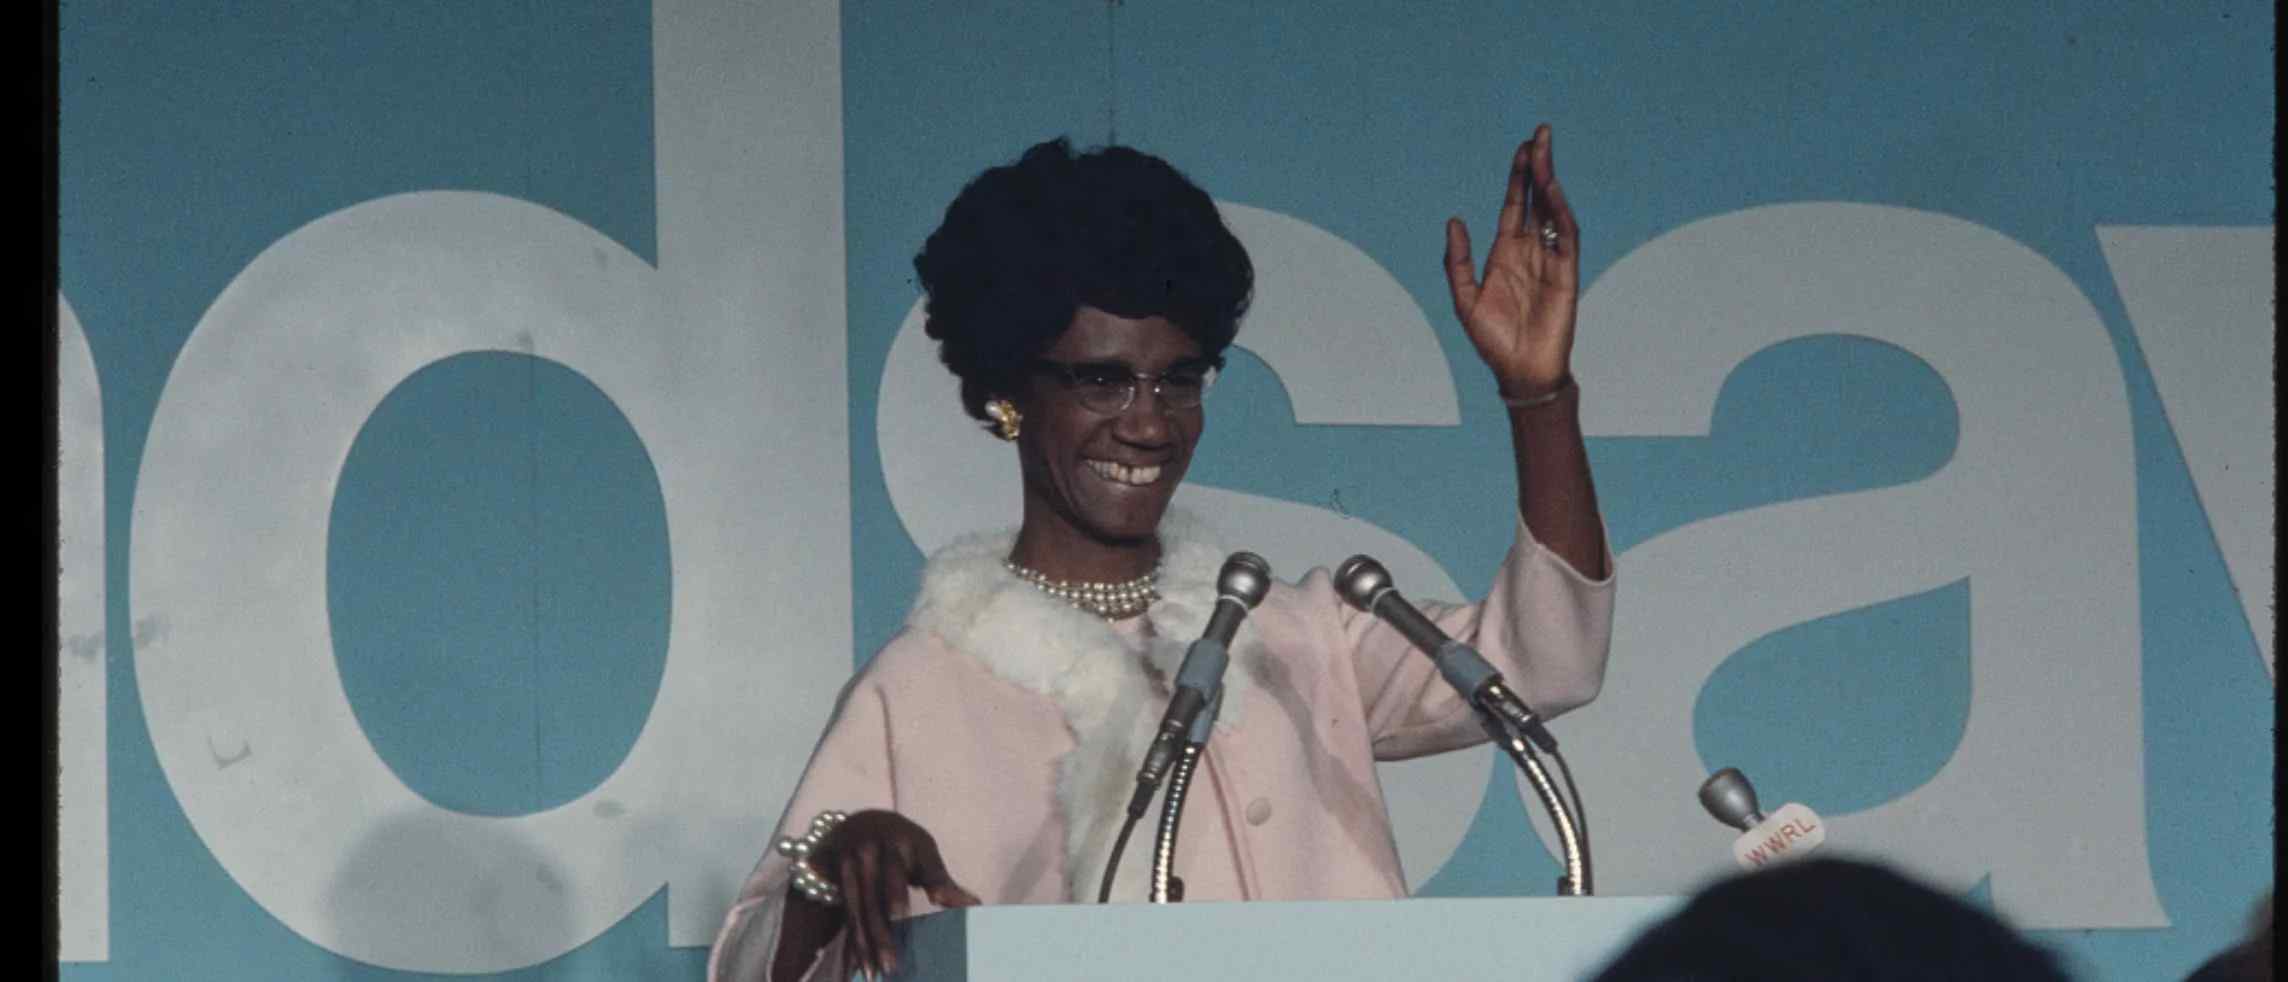 Gotfryd, B., photographer. (ca. 1972) Shirley Chisholm. United States, ca. 1972. [Photograph] Retrieved from the Library of Congress